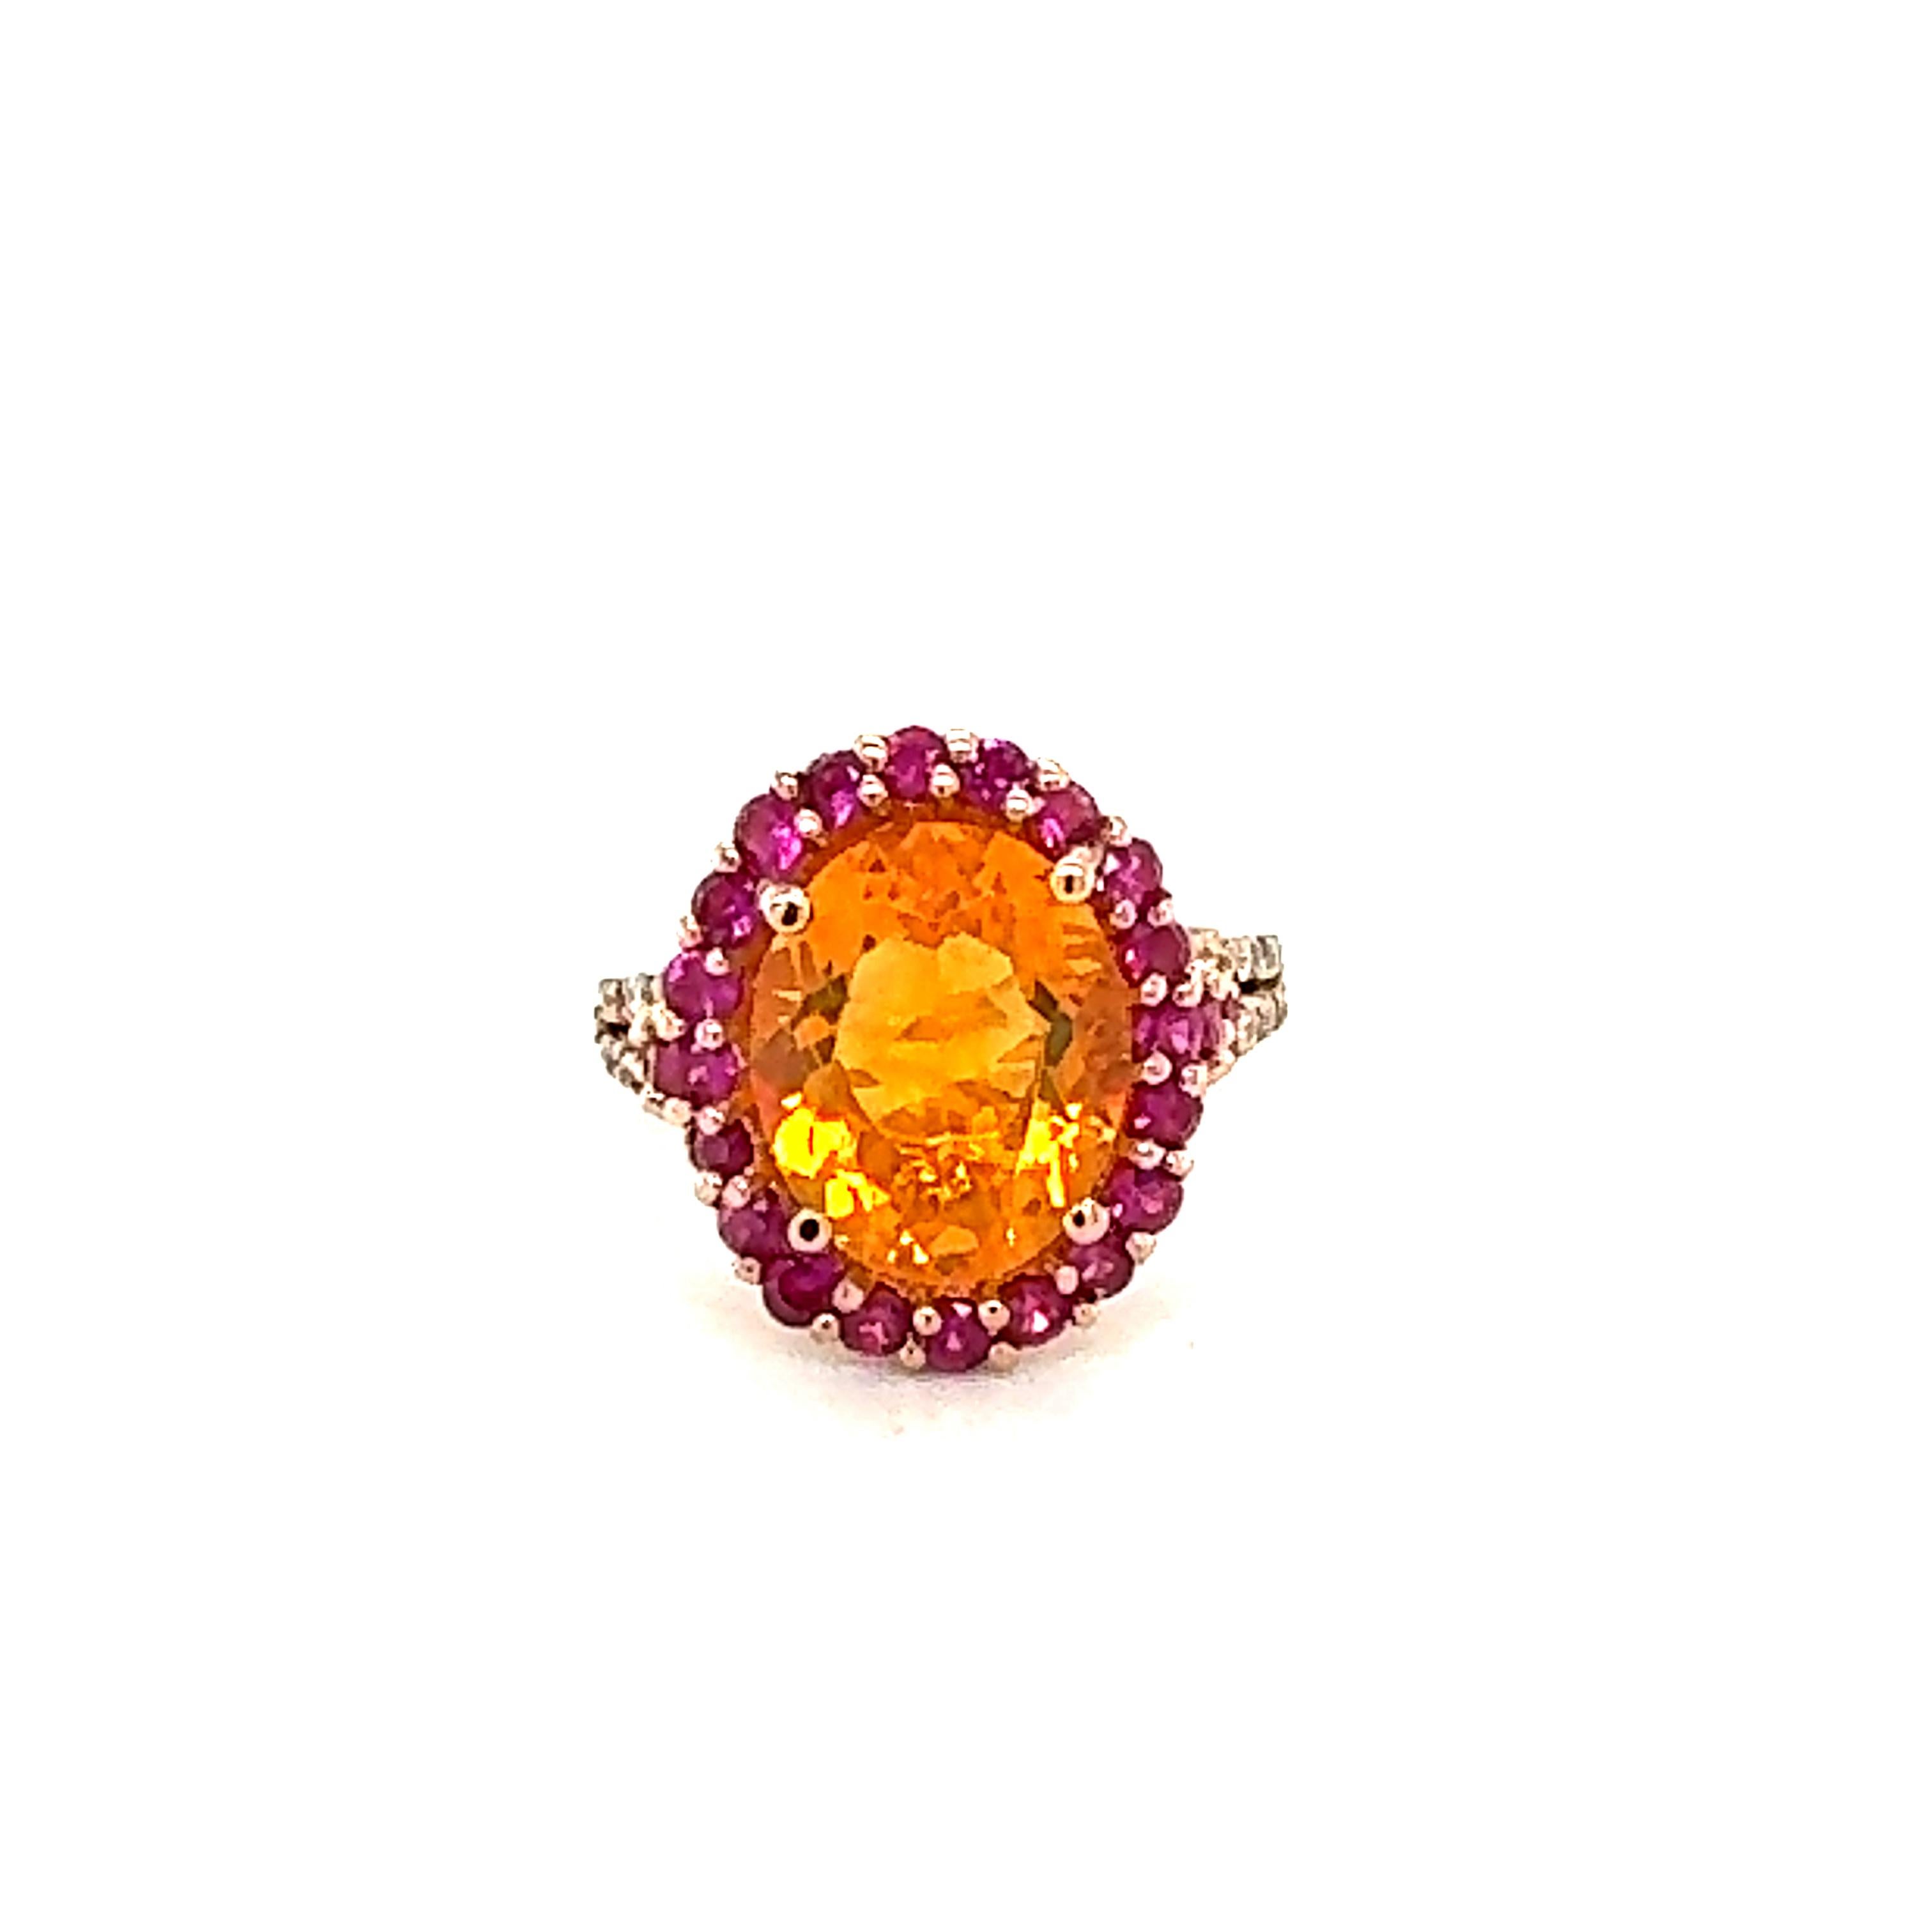 5.27 Carat Oval Cut Fire Opal Sapphire Diamond Rose Gold Cocktail Ring In New Condition For Sale In Los Angeles, CA